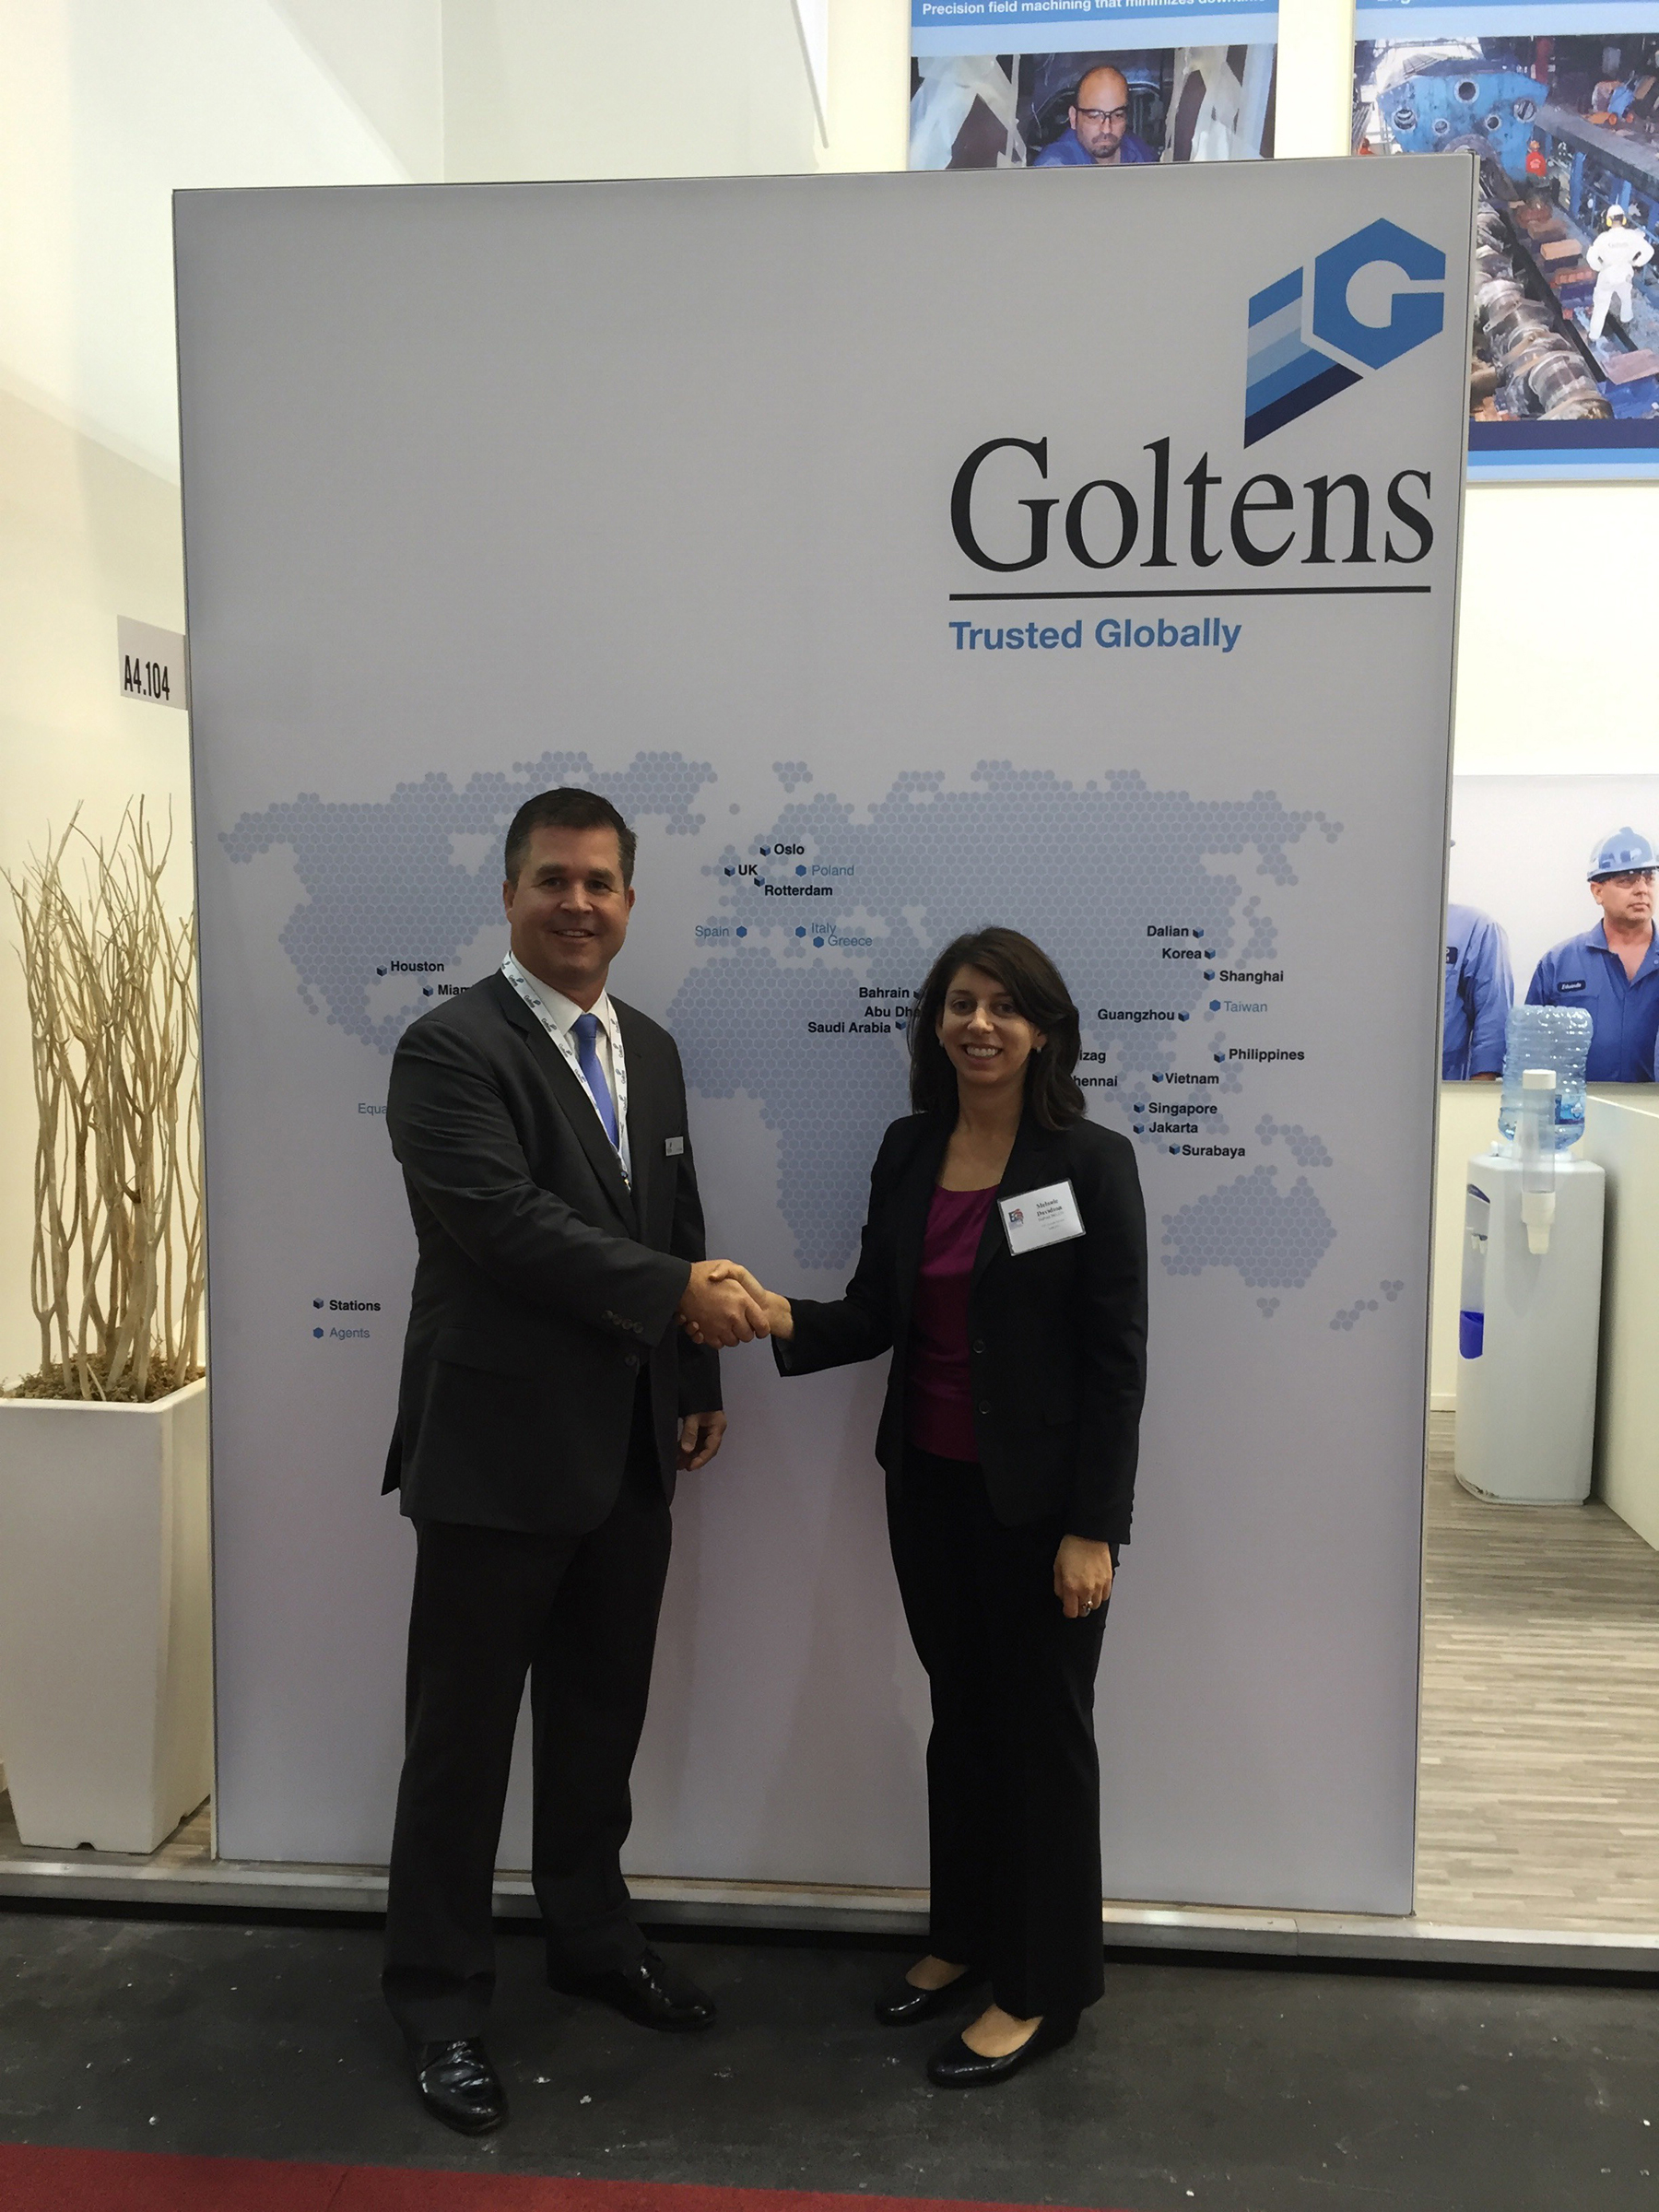 DuPont Clean Technologies and Goltens Worldwide Management Corporation to Collaborate on Marine Scrubbers